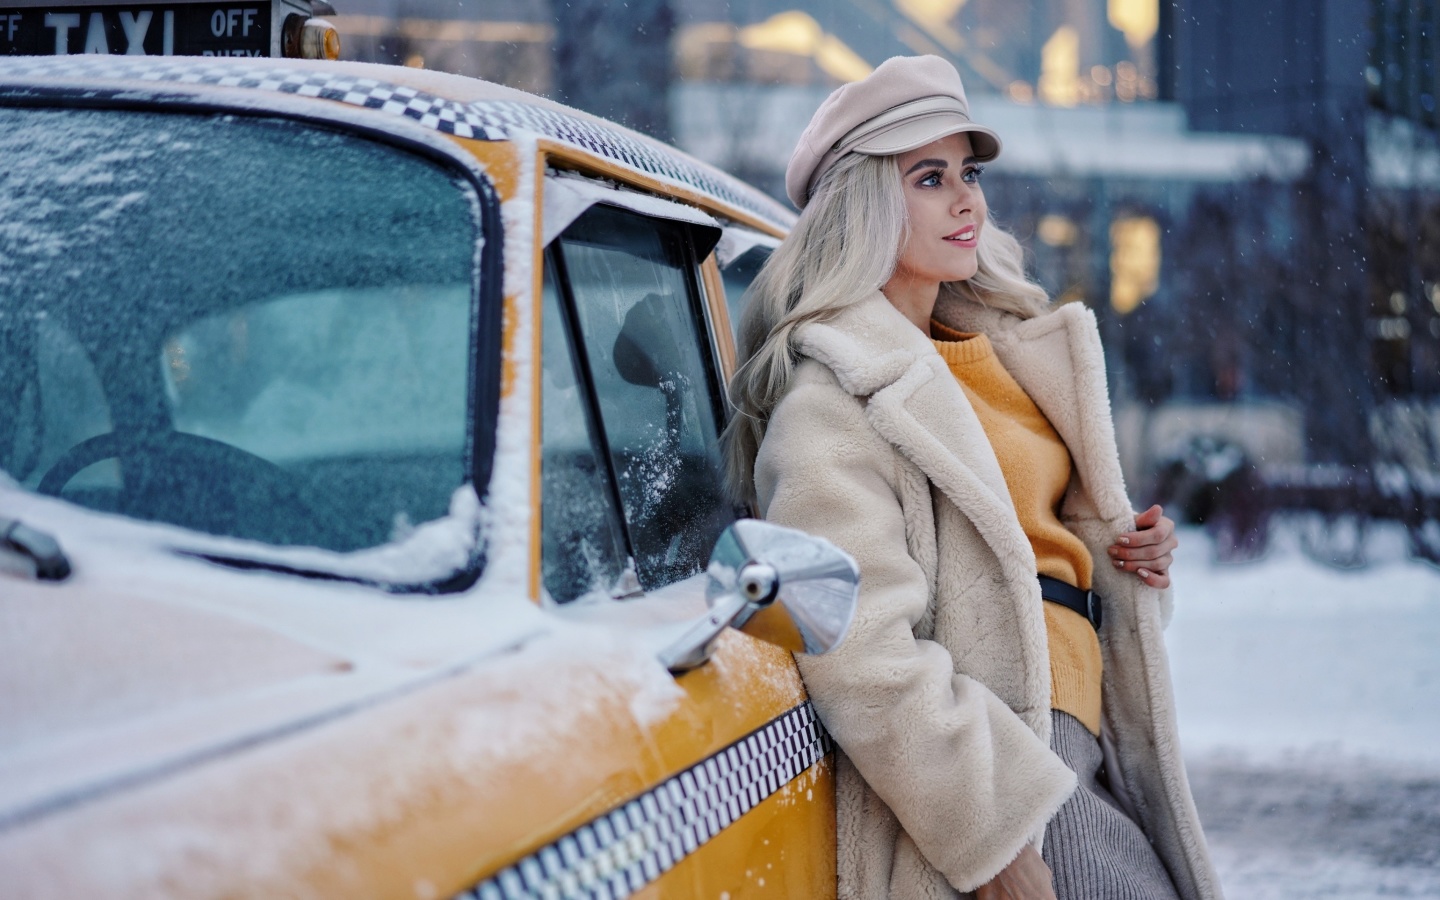 Winter Girl and Taxi wallpaper 1440x900